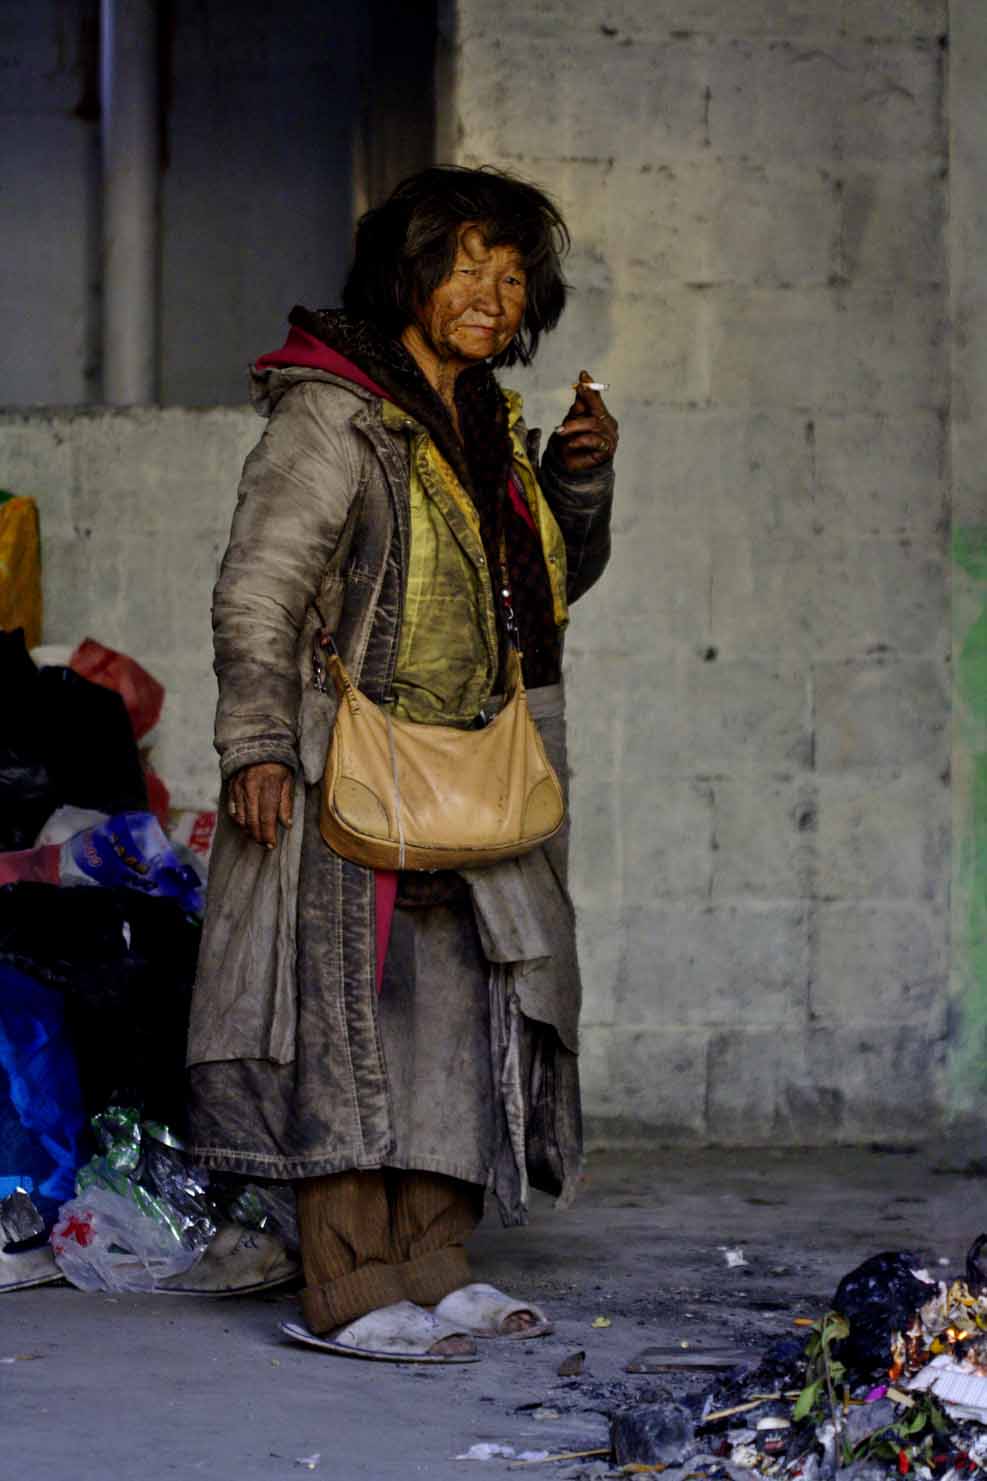 Elderly homeless person at temporary home.